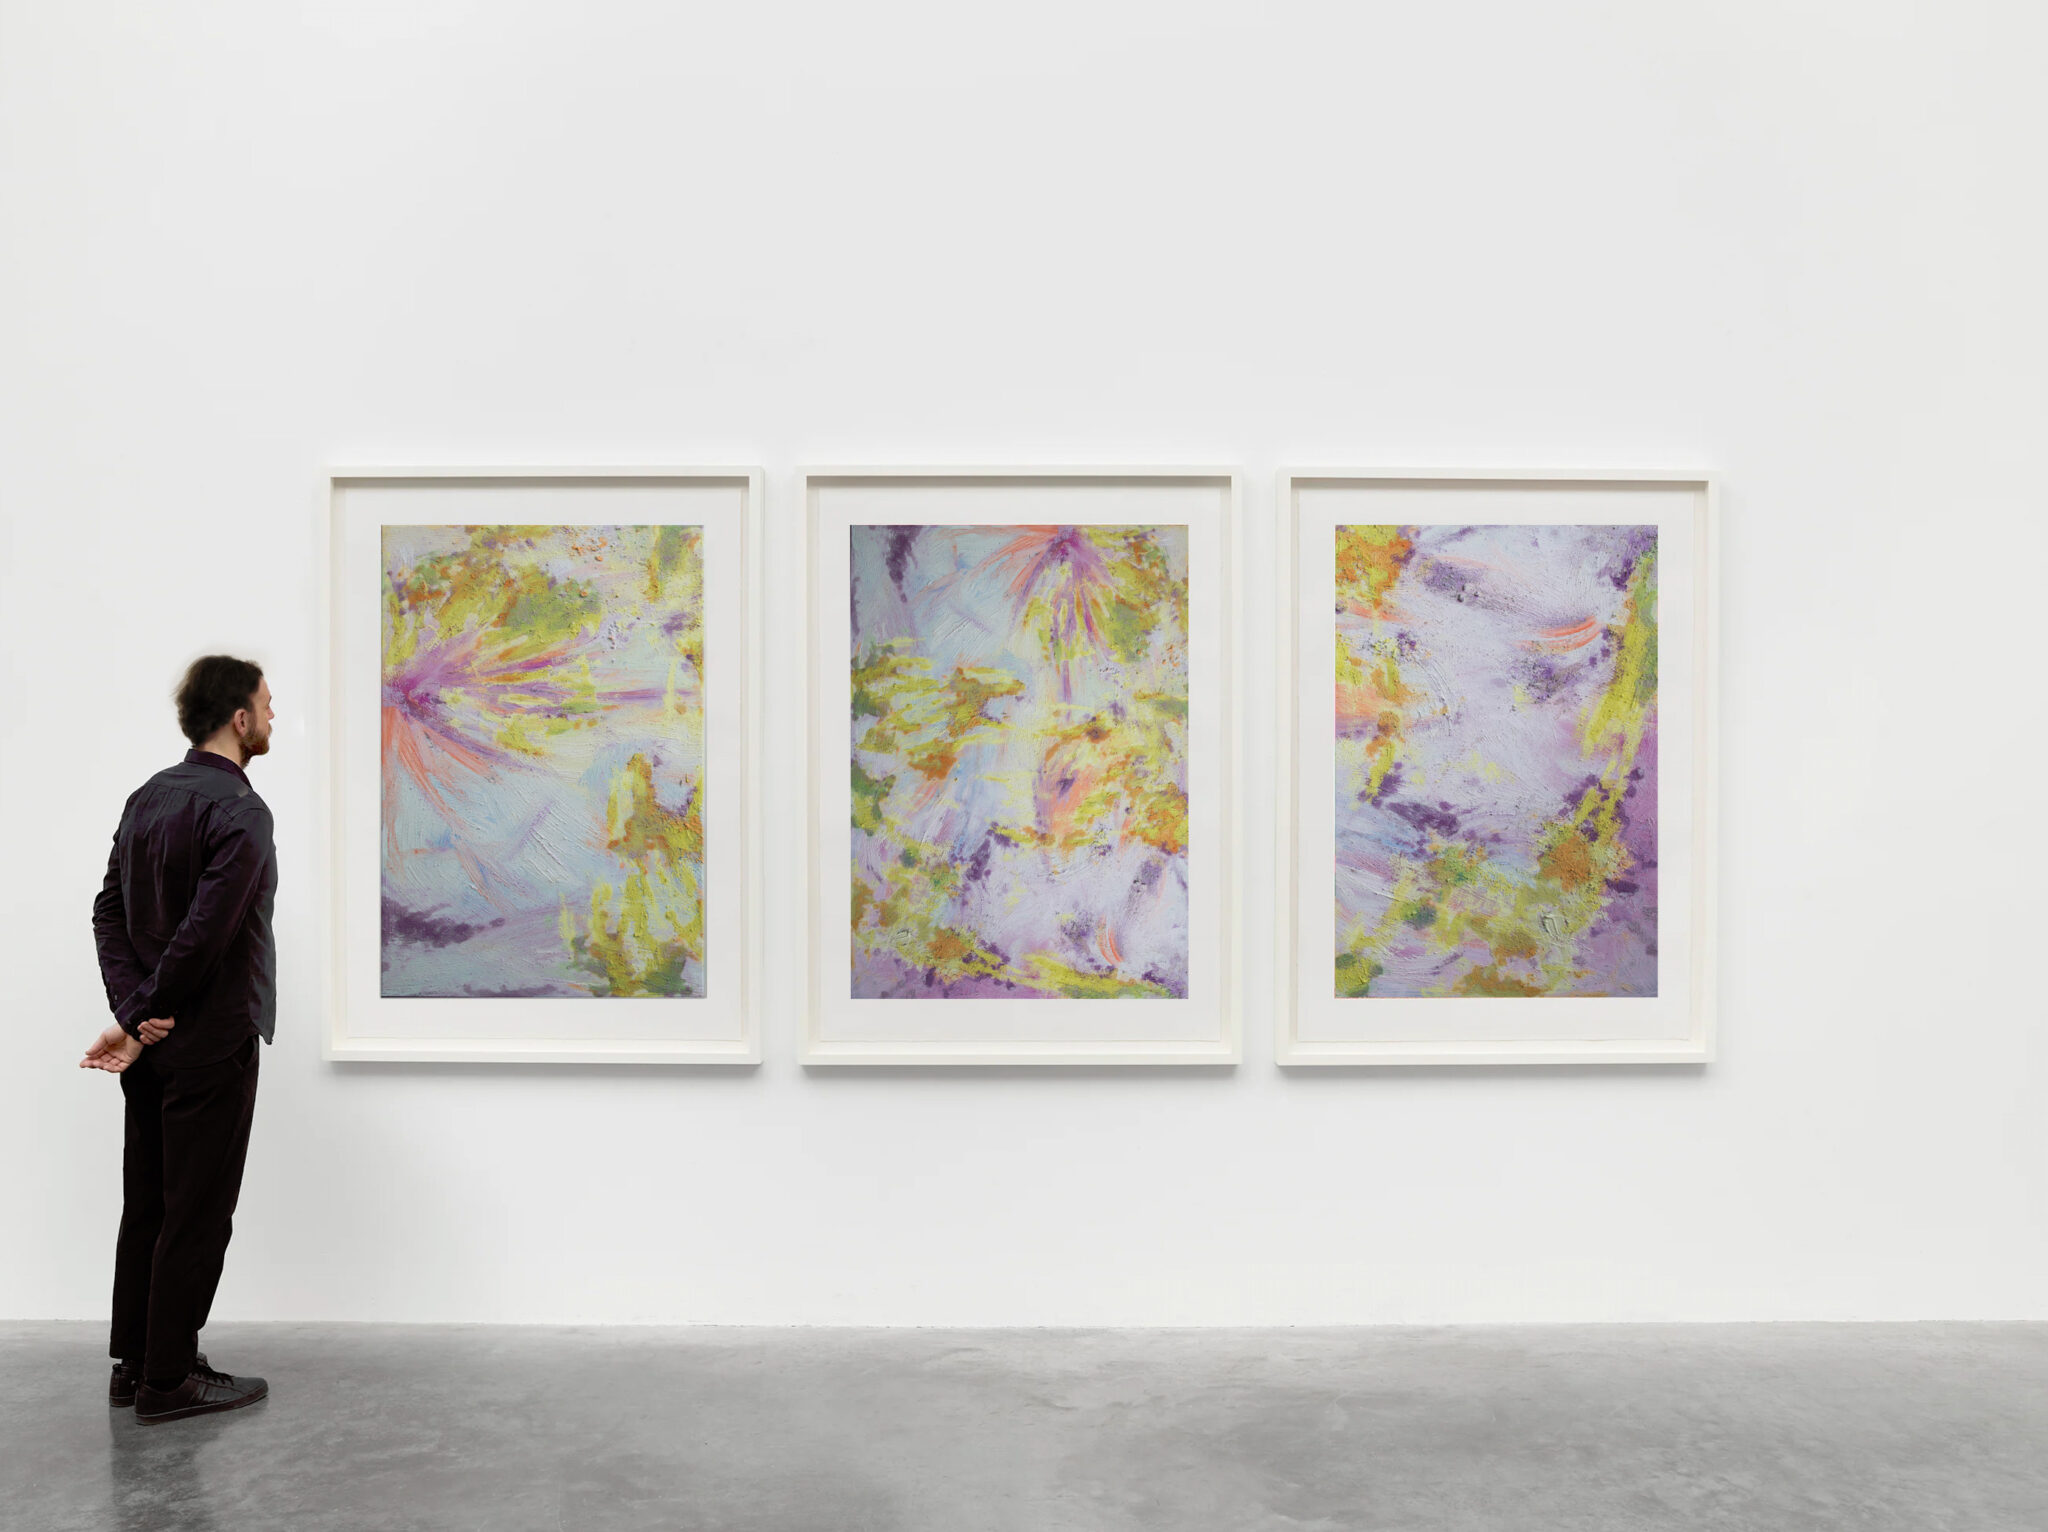 Male Viewer Admiring a tryptic artwork created by the artist Ornella Gallo Di Fortuna on colourful brushstrokes on white frames on withe walls